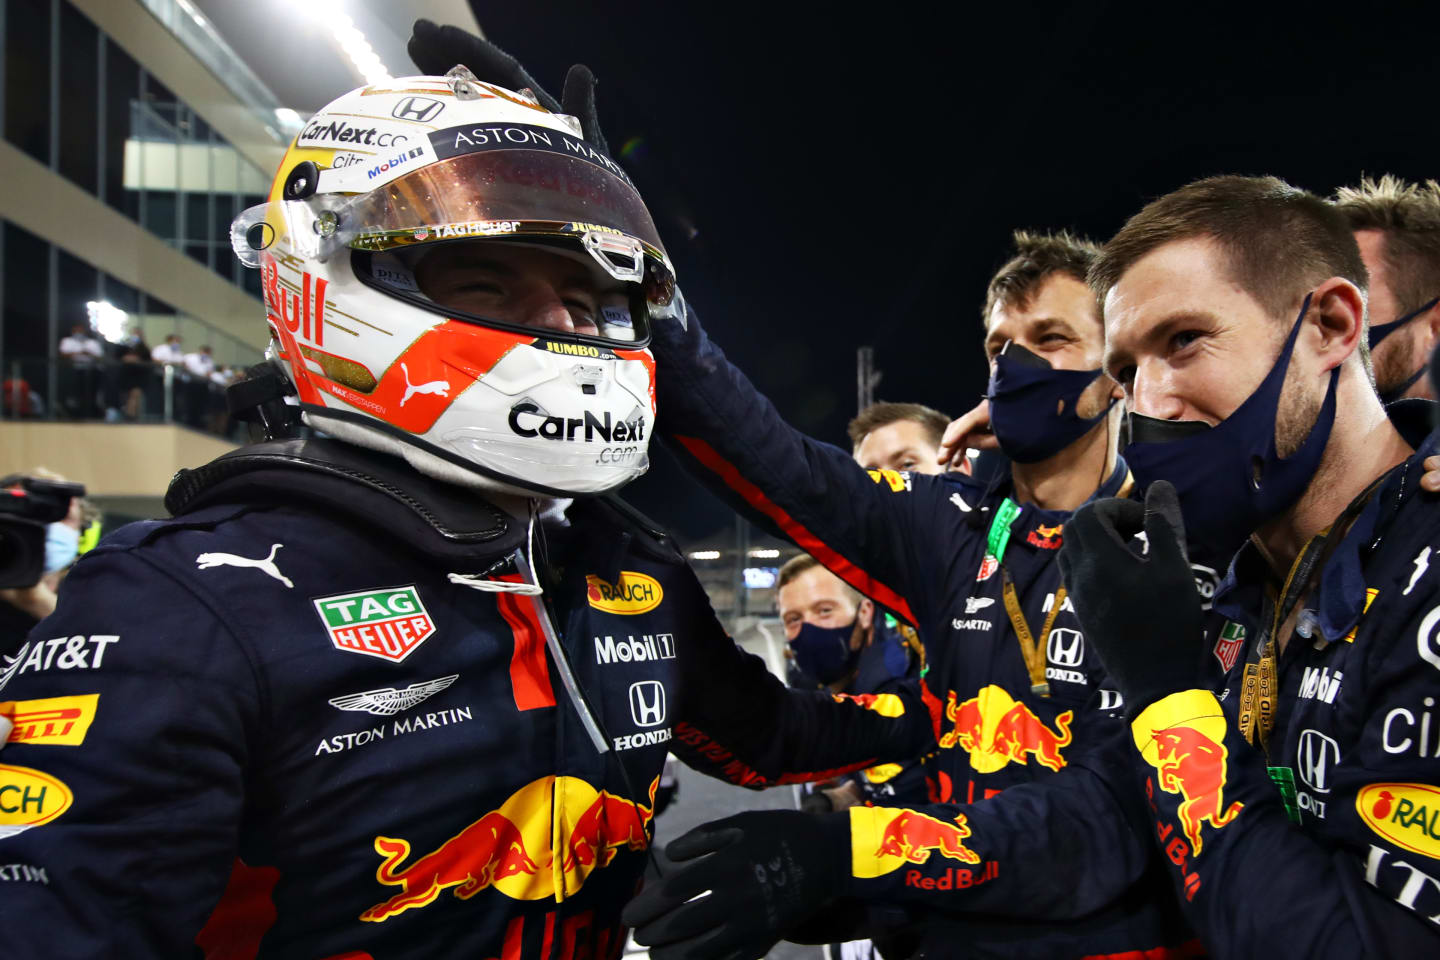 ABU DHABI, UNITED ARAB EMIRATES - DECEMBER 13: Race winner Max Verstappen of Netherlands and Red Bull Racing celebrates with his team in parc ferme during the F1 Grand Prix of Abu Dhabi at Yas Marina Circuit on December 13, 2020 in Abu Dhabi, United Arab Emirates. (Photo by Mark Thompson/Getty Images)